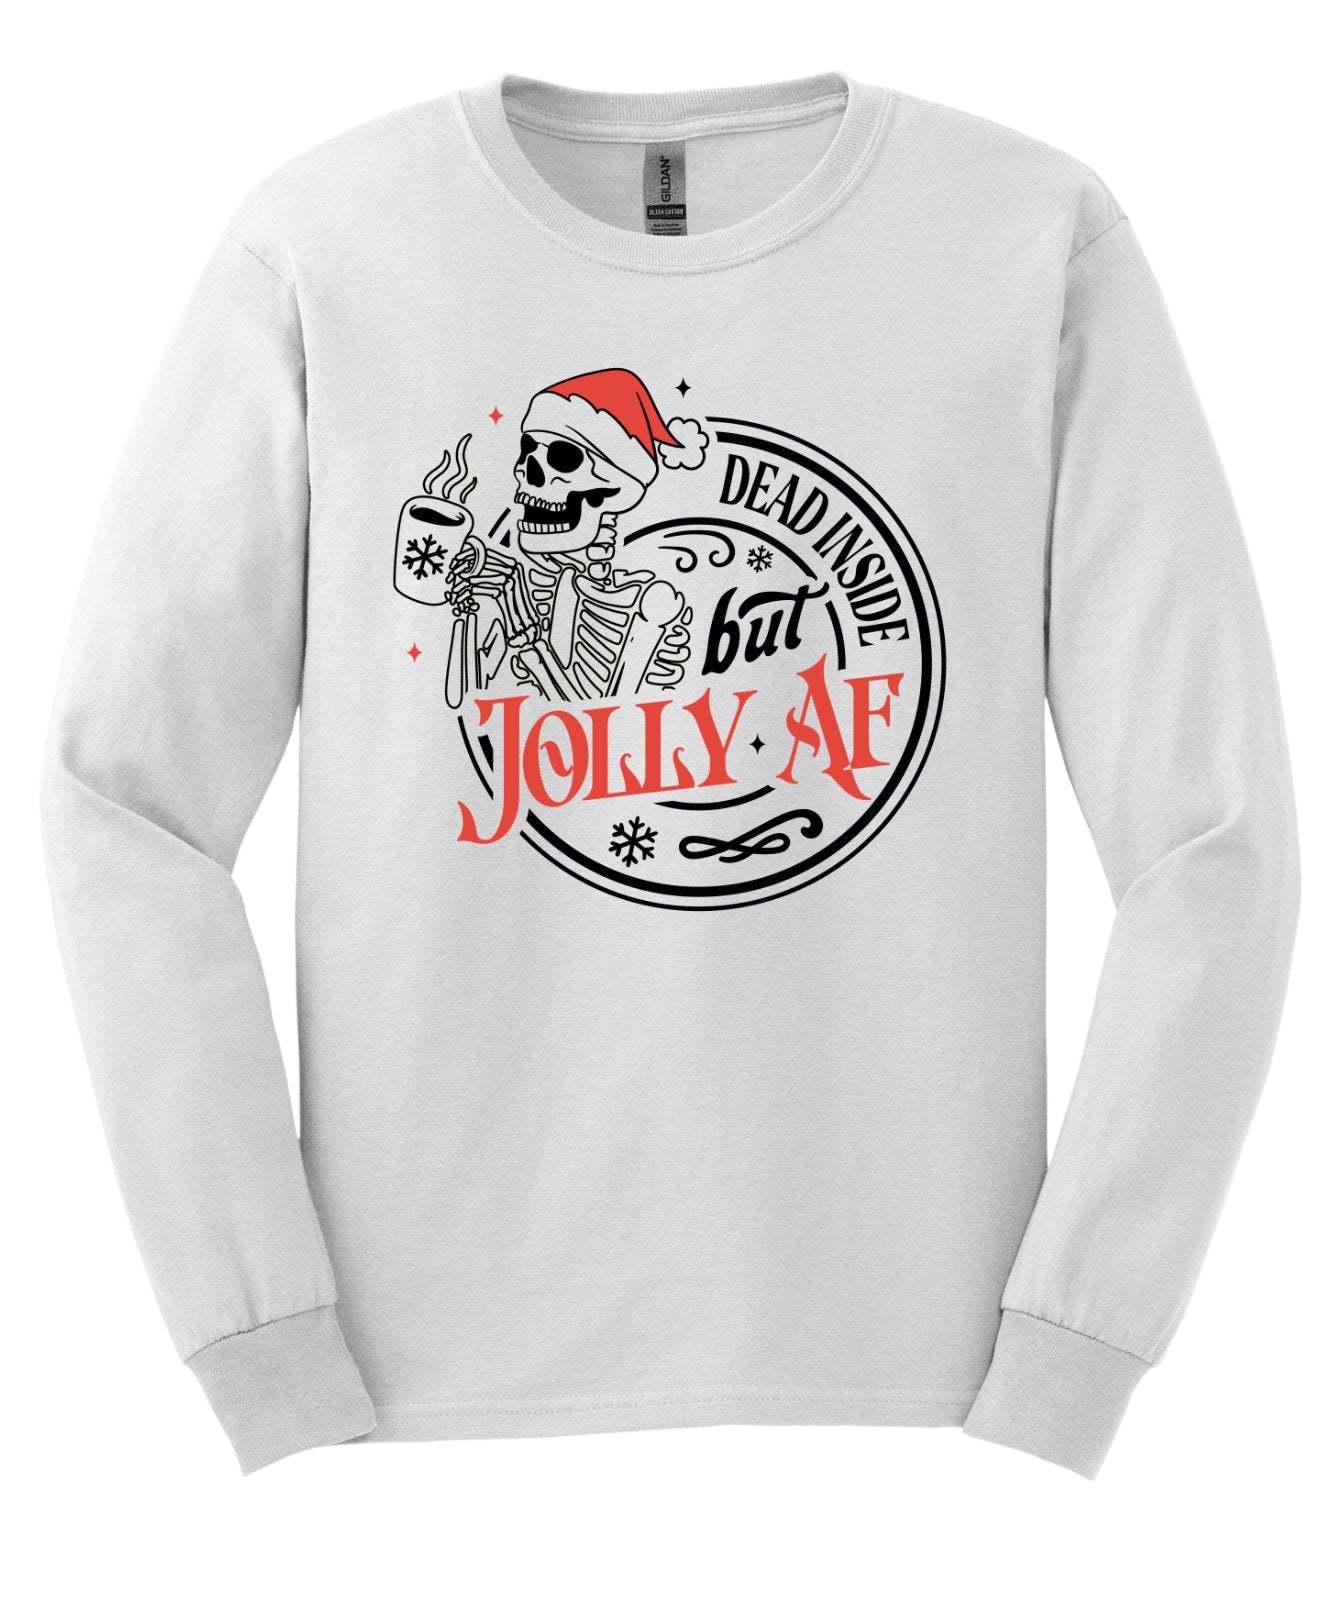 Dead Inside but Jolly AF, Long Sleeve and Short Sleeve Shirt, Cotton, Adult Tee